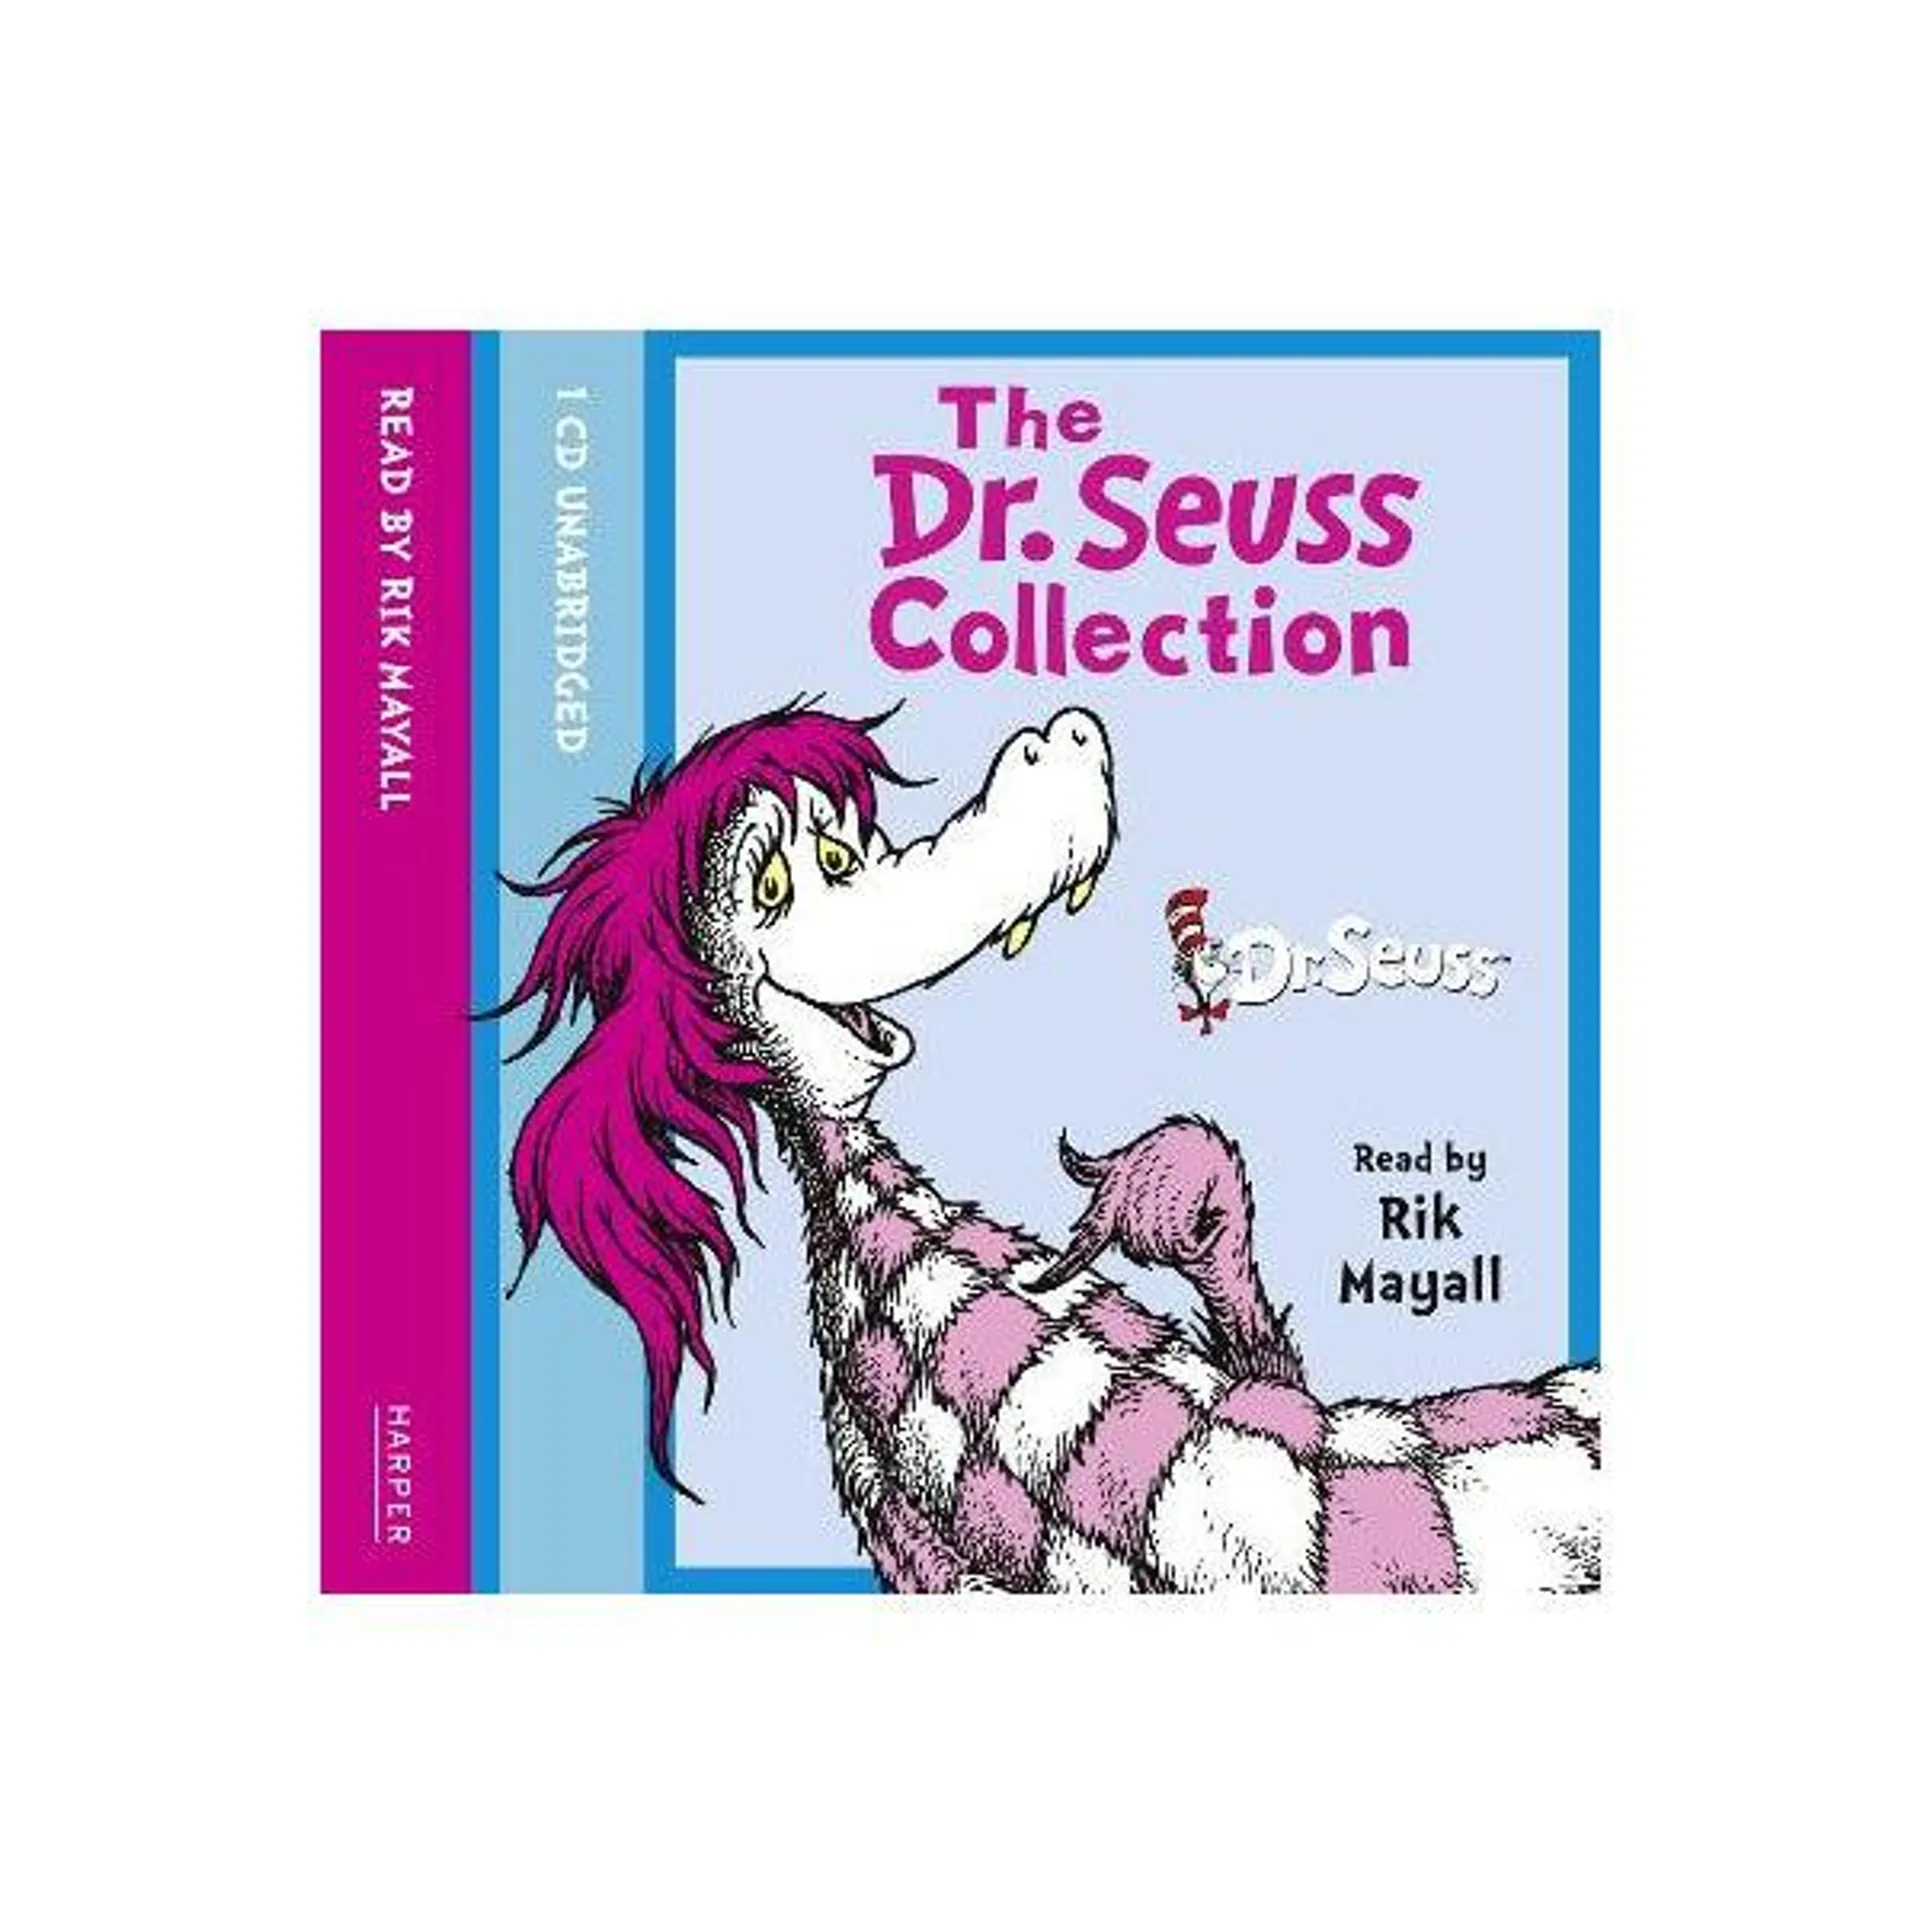 The Dr. Seuss Collection Single Item